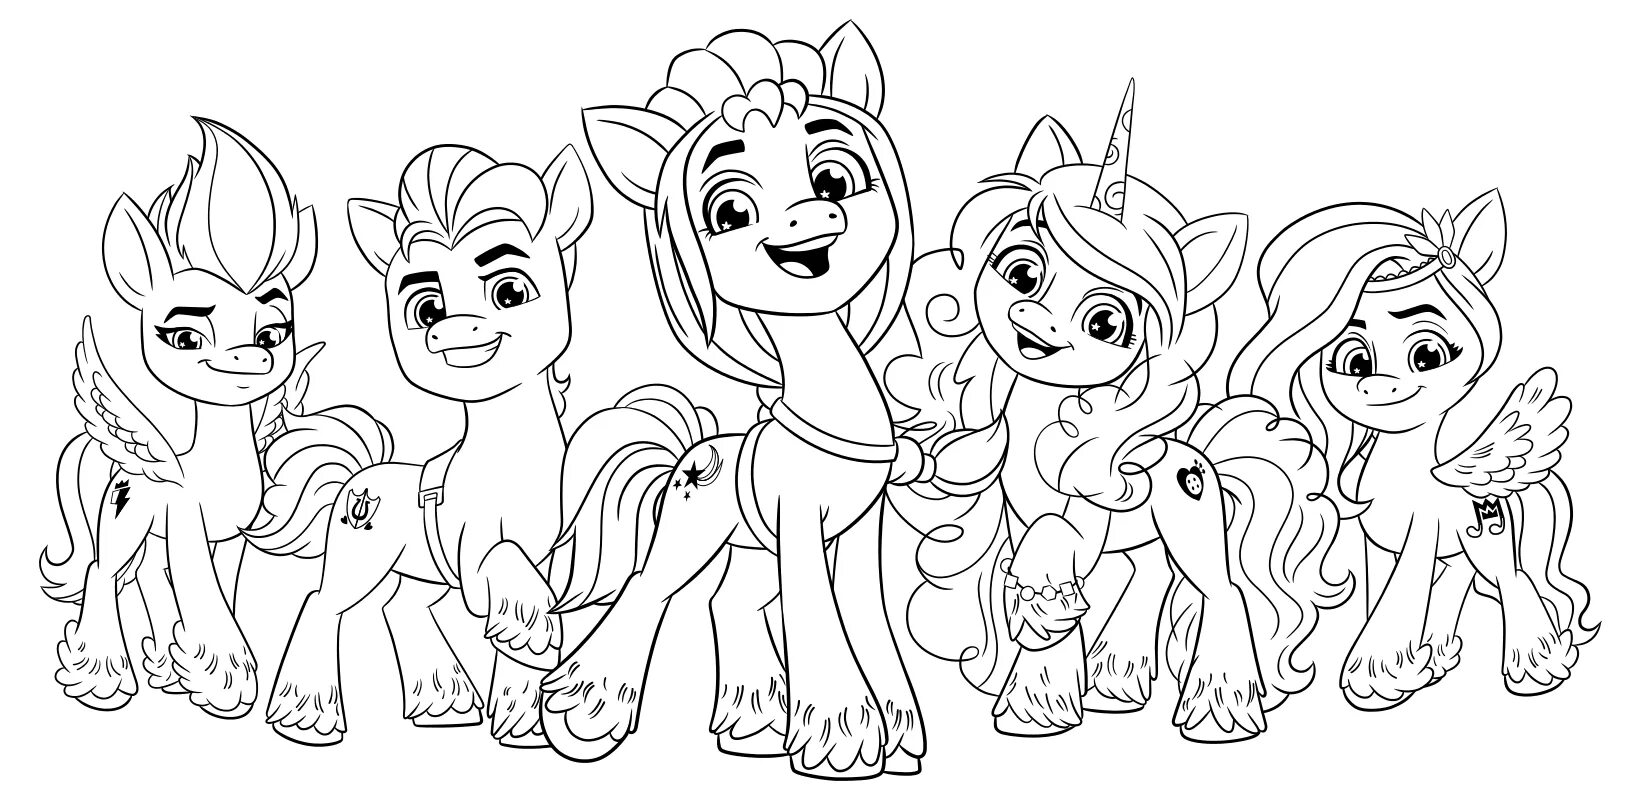 Easy pony coloring page